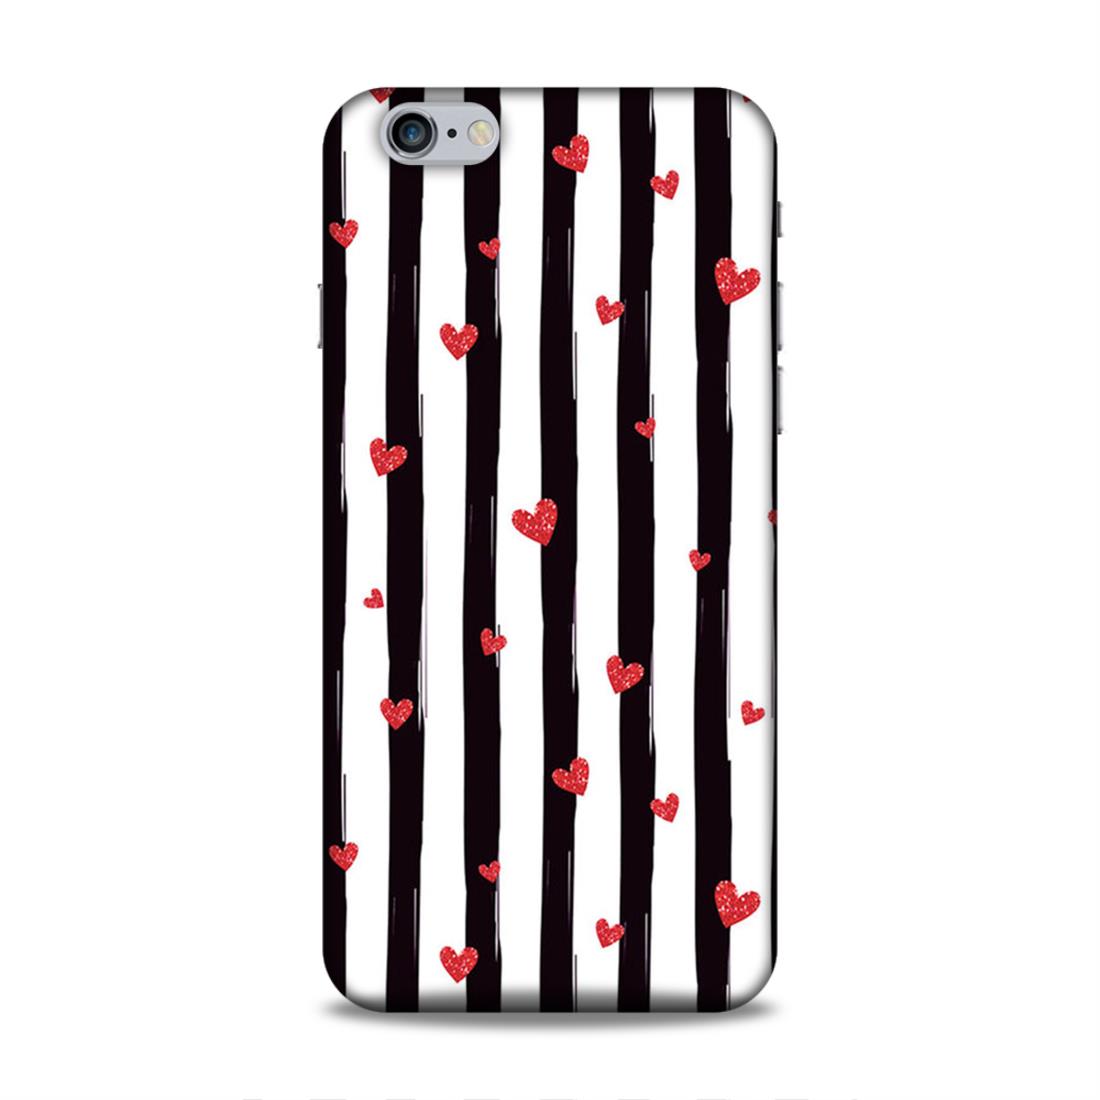 Little Hearts with Strips Hard Back Case For Apple iPhone 6 Plus / 6s Plus